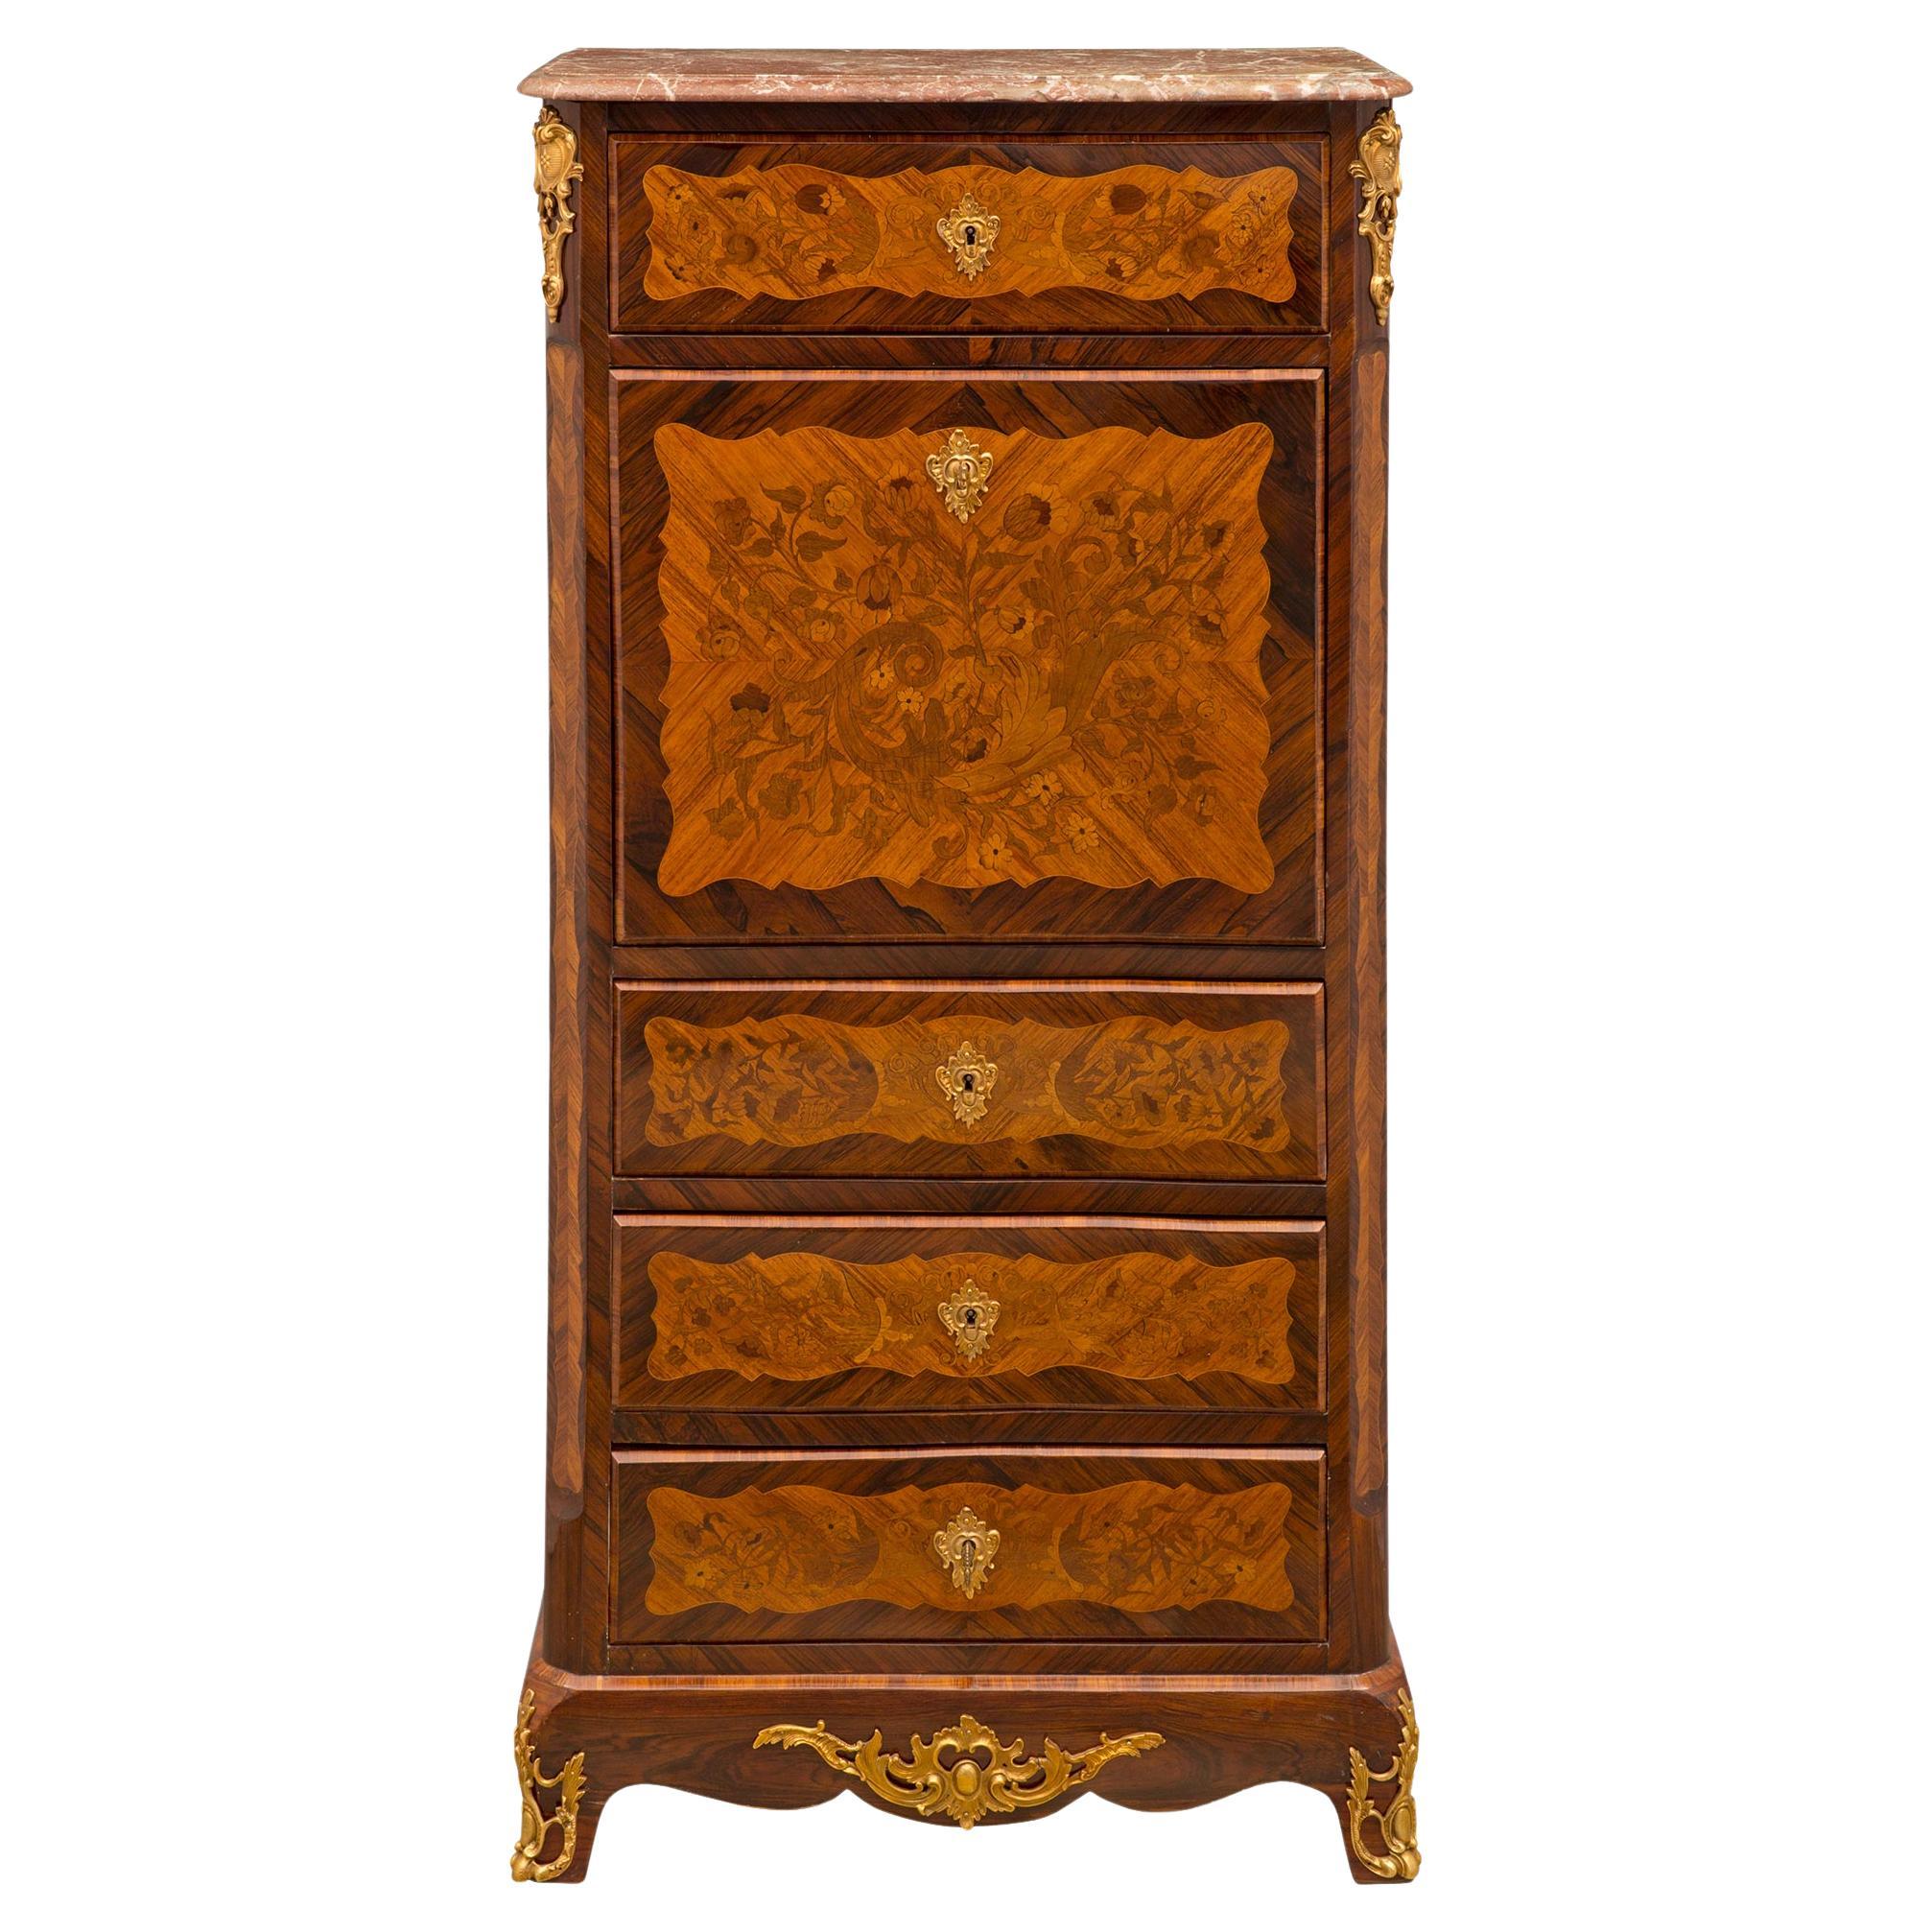 French, 19th Century, Transitional Style Tulipwood and Kingwood Secretary For Sale